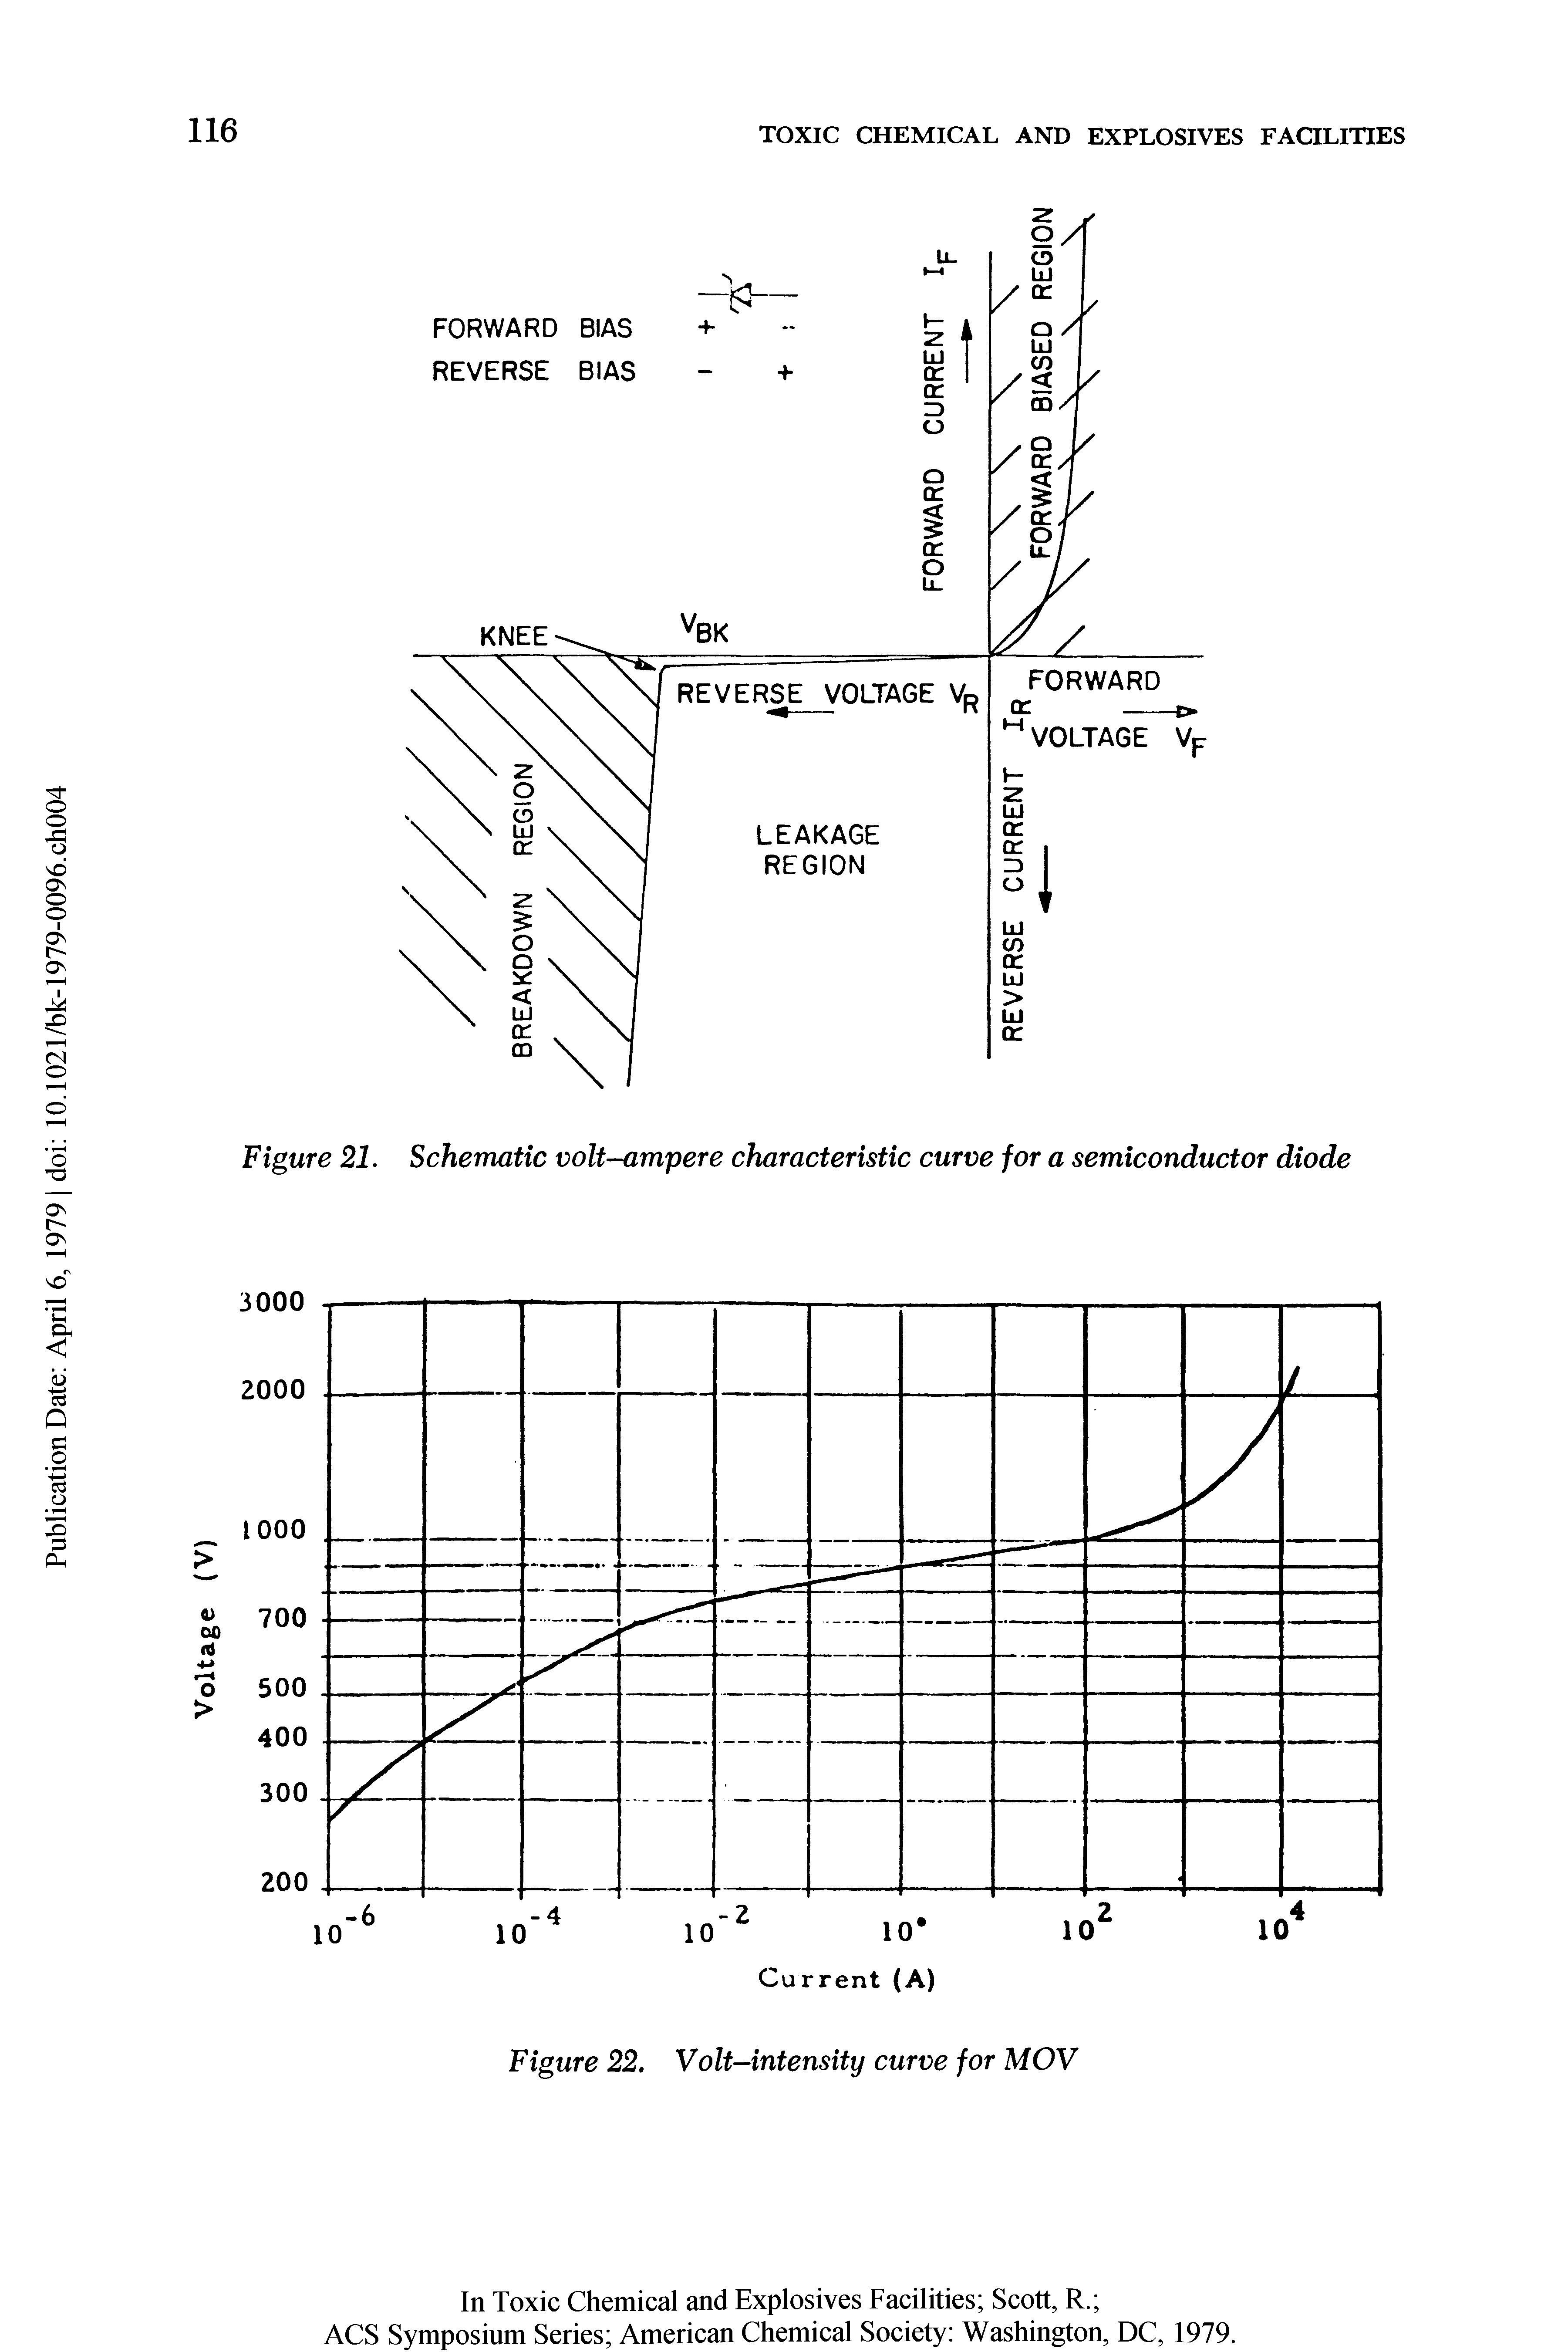 Figure 21. Schematic volt-ampere characteristic curve for a semiconductor diode...